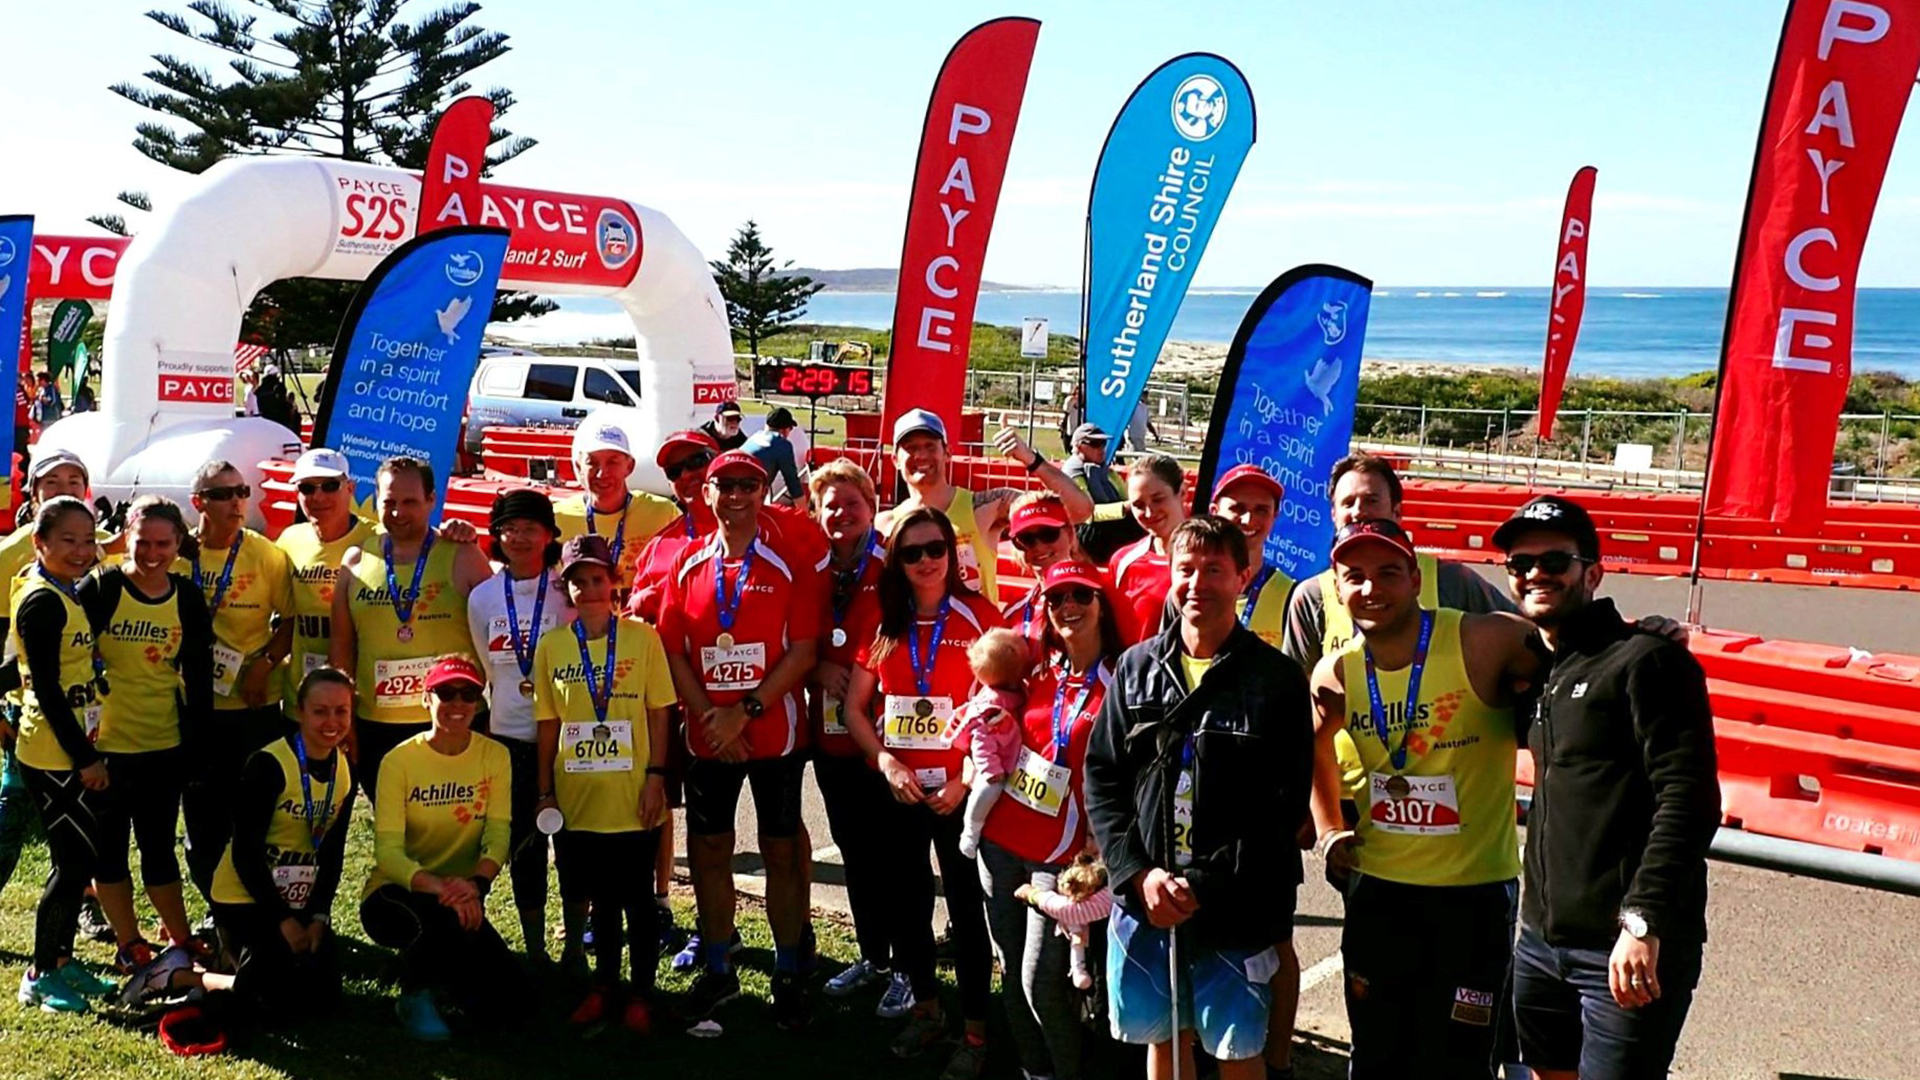 PAYCE Sutherland 2 Surf – Achilles Sydney team ready to participate